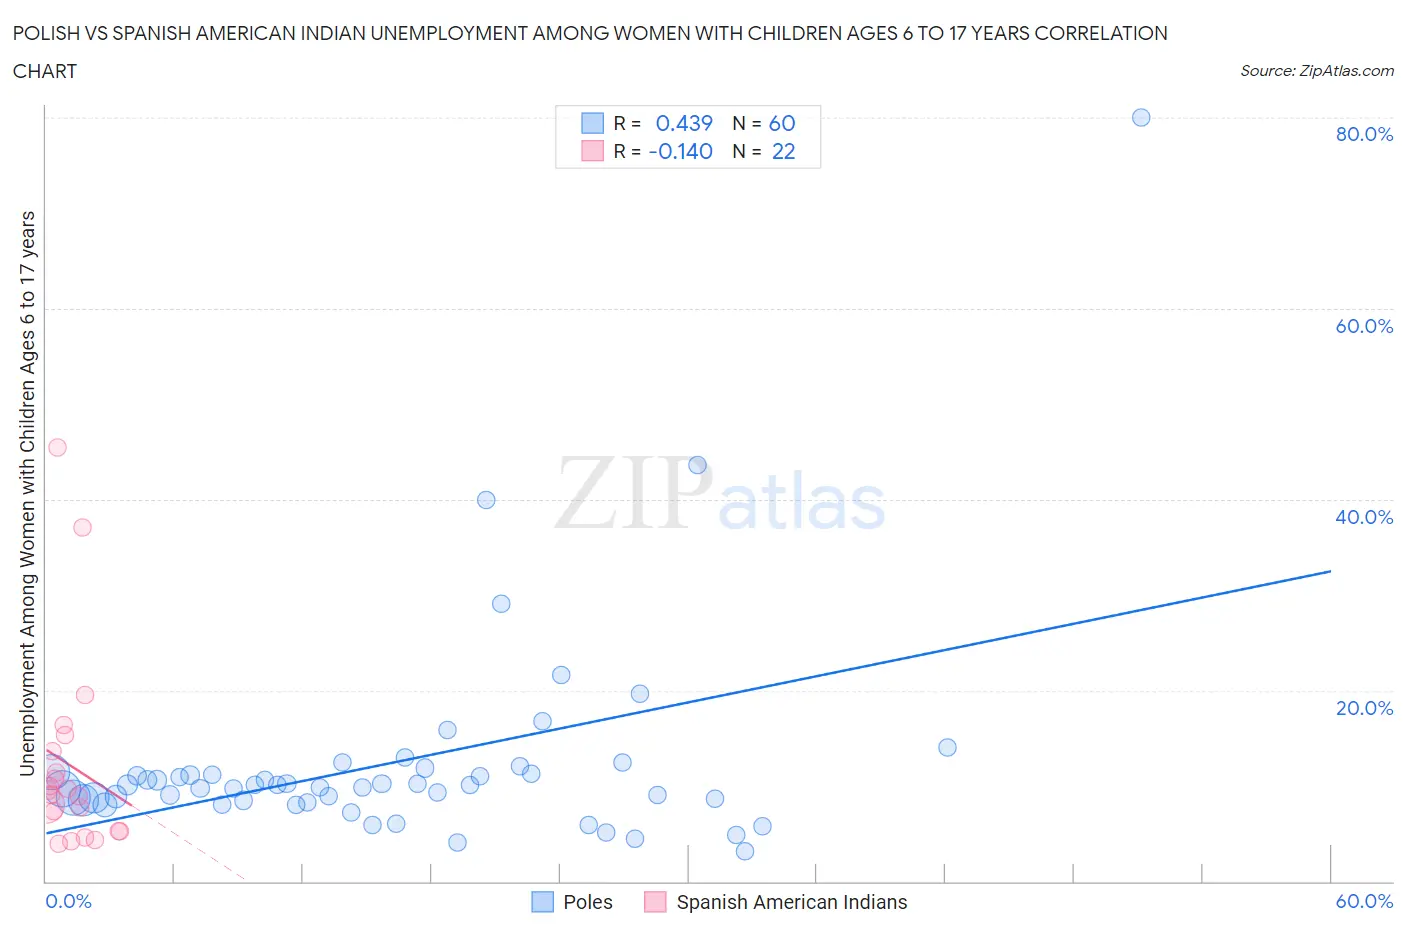 Polish vs Spanish American Indian Unemployment Among Women with Children Ages 6 to 17 years